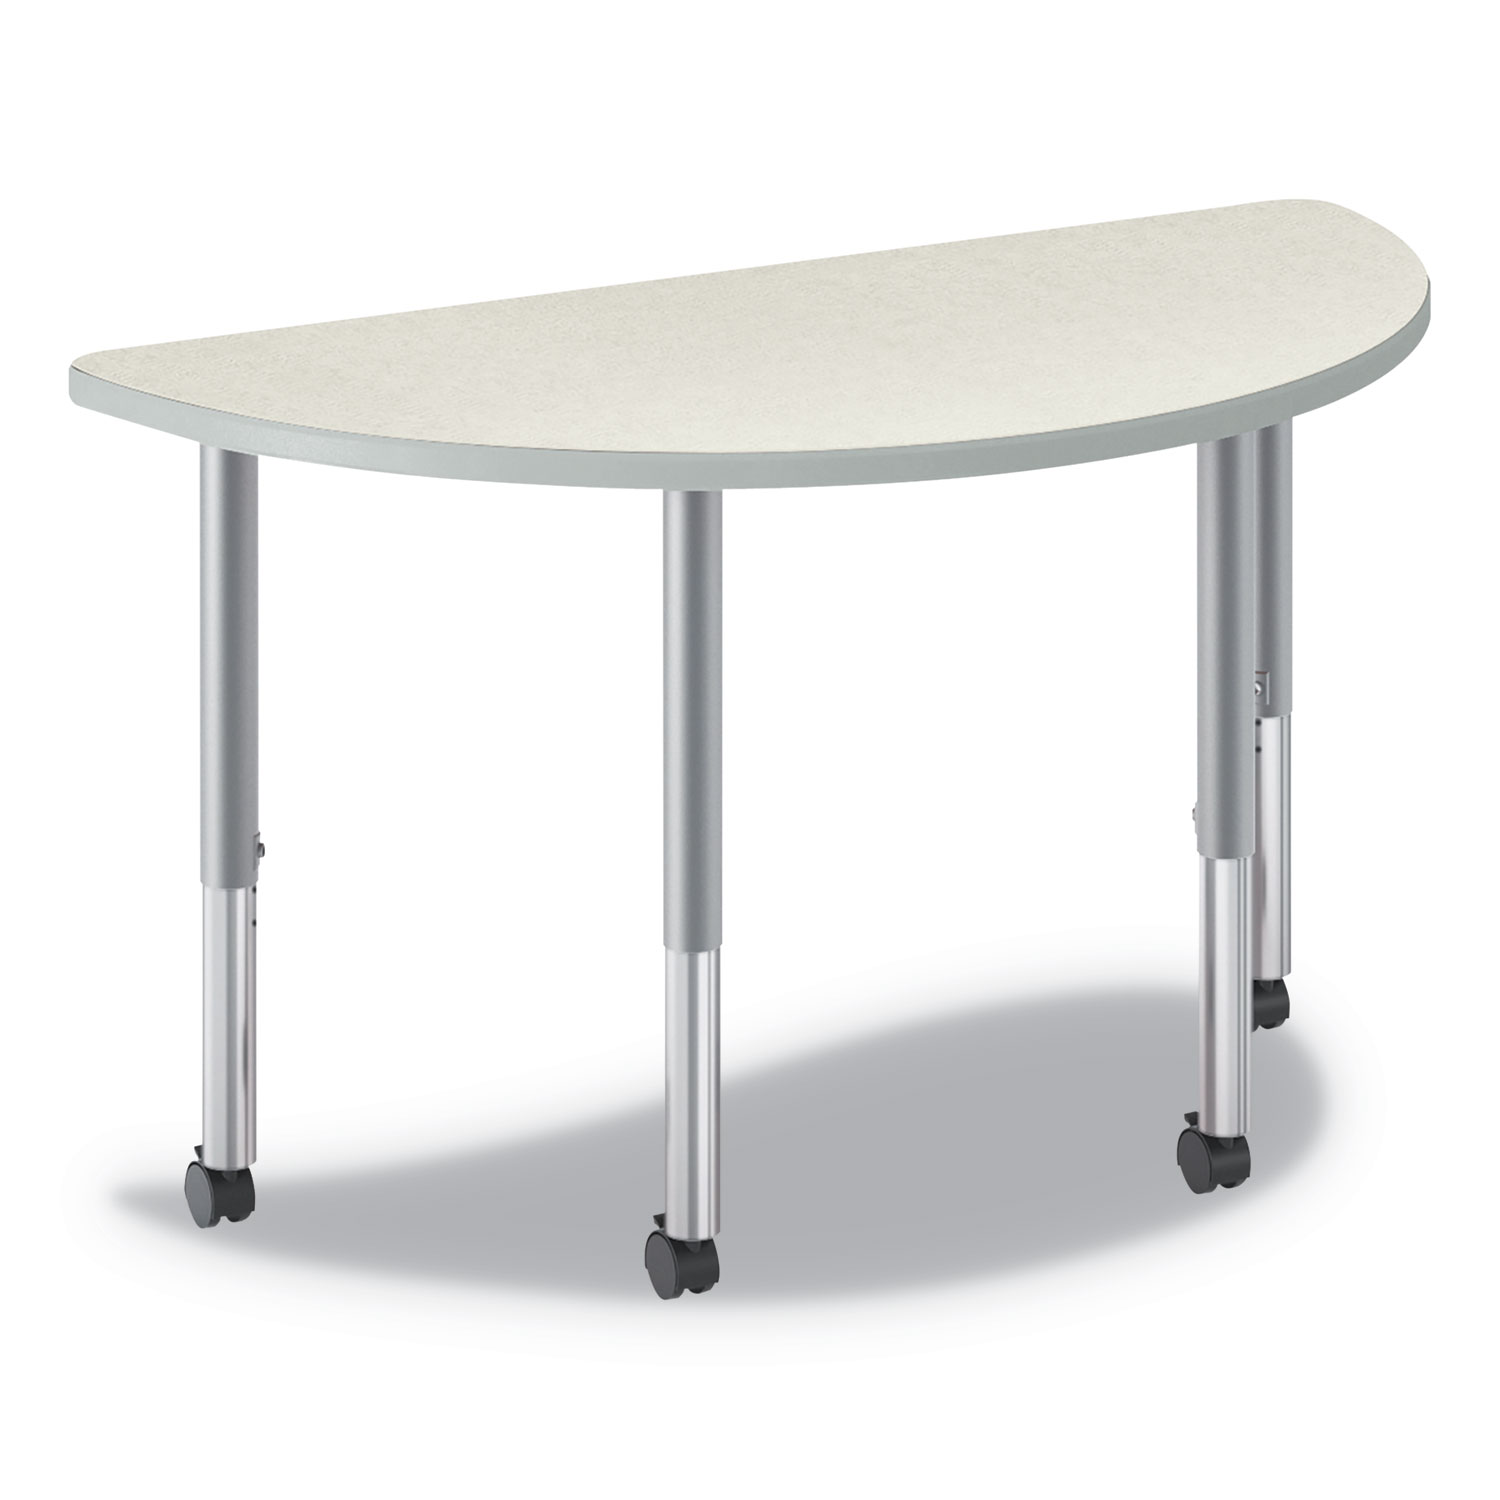 Build Half Round Shape Table Top, 60w x 30d, Silver Mesh